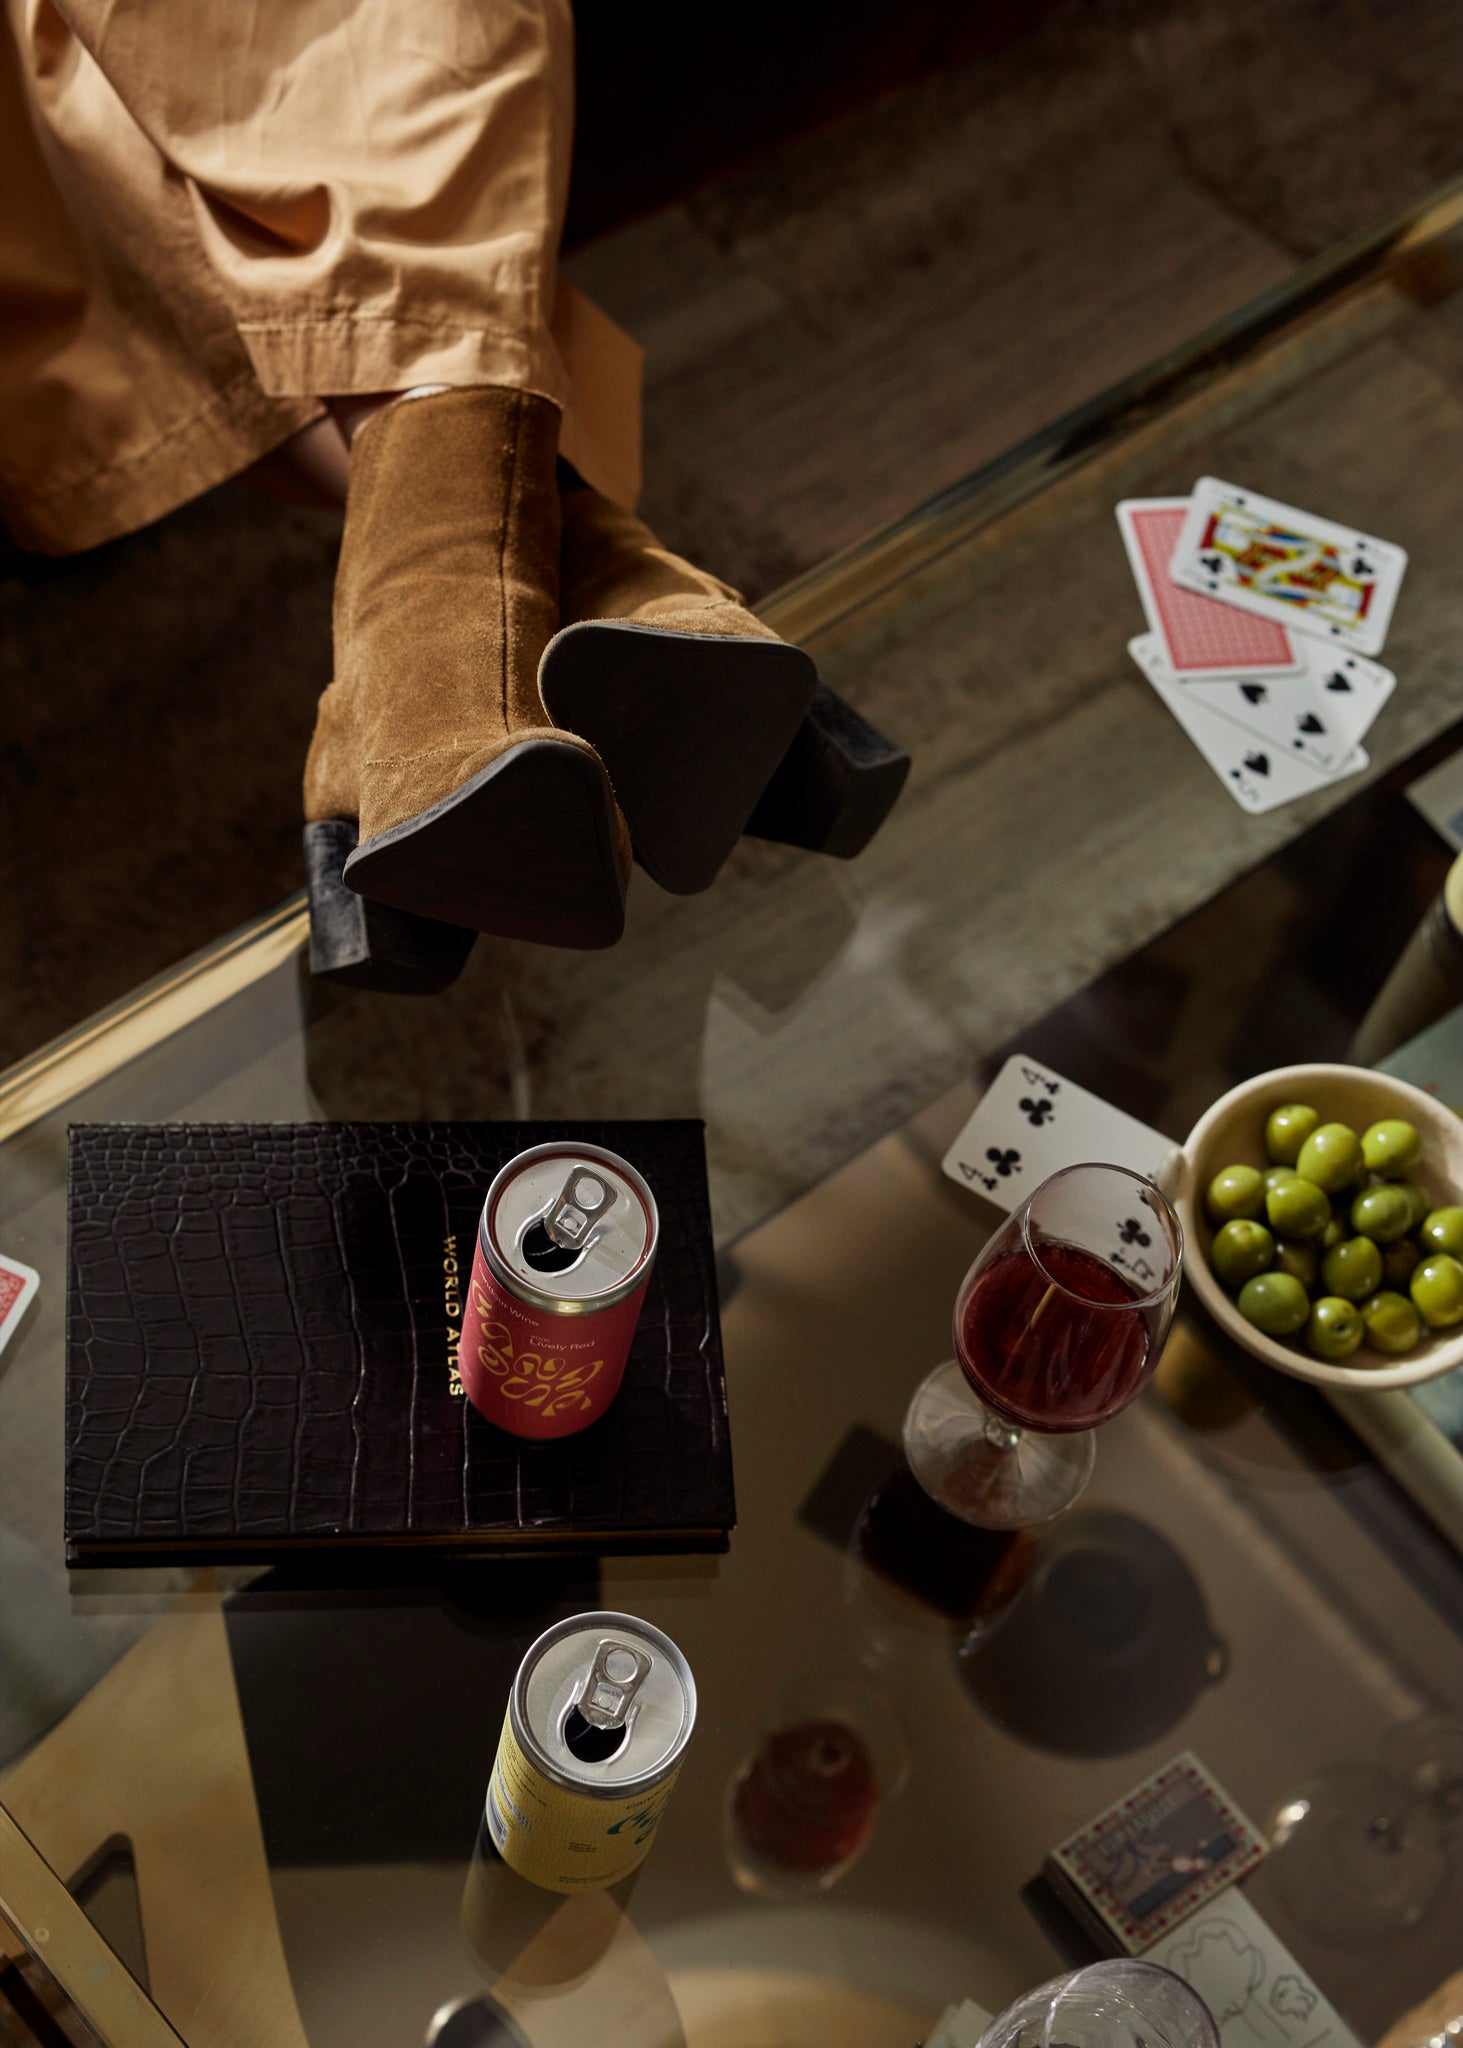 Woman wearing brown boots and resting her feet on a coffee table that holds a can of Candour red wine, a can of Candour white wine, cards, a book, and a bowl with green olives